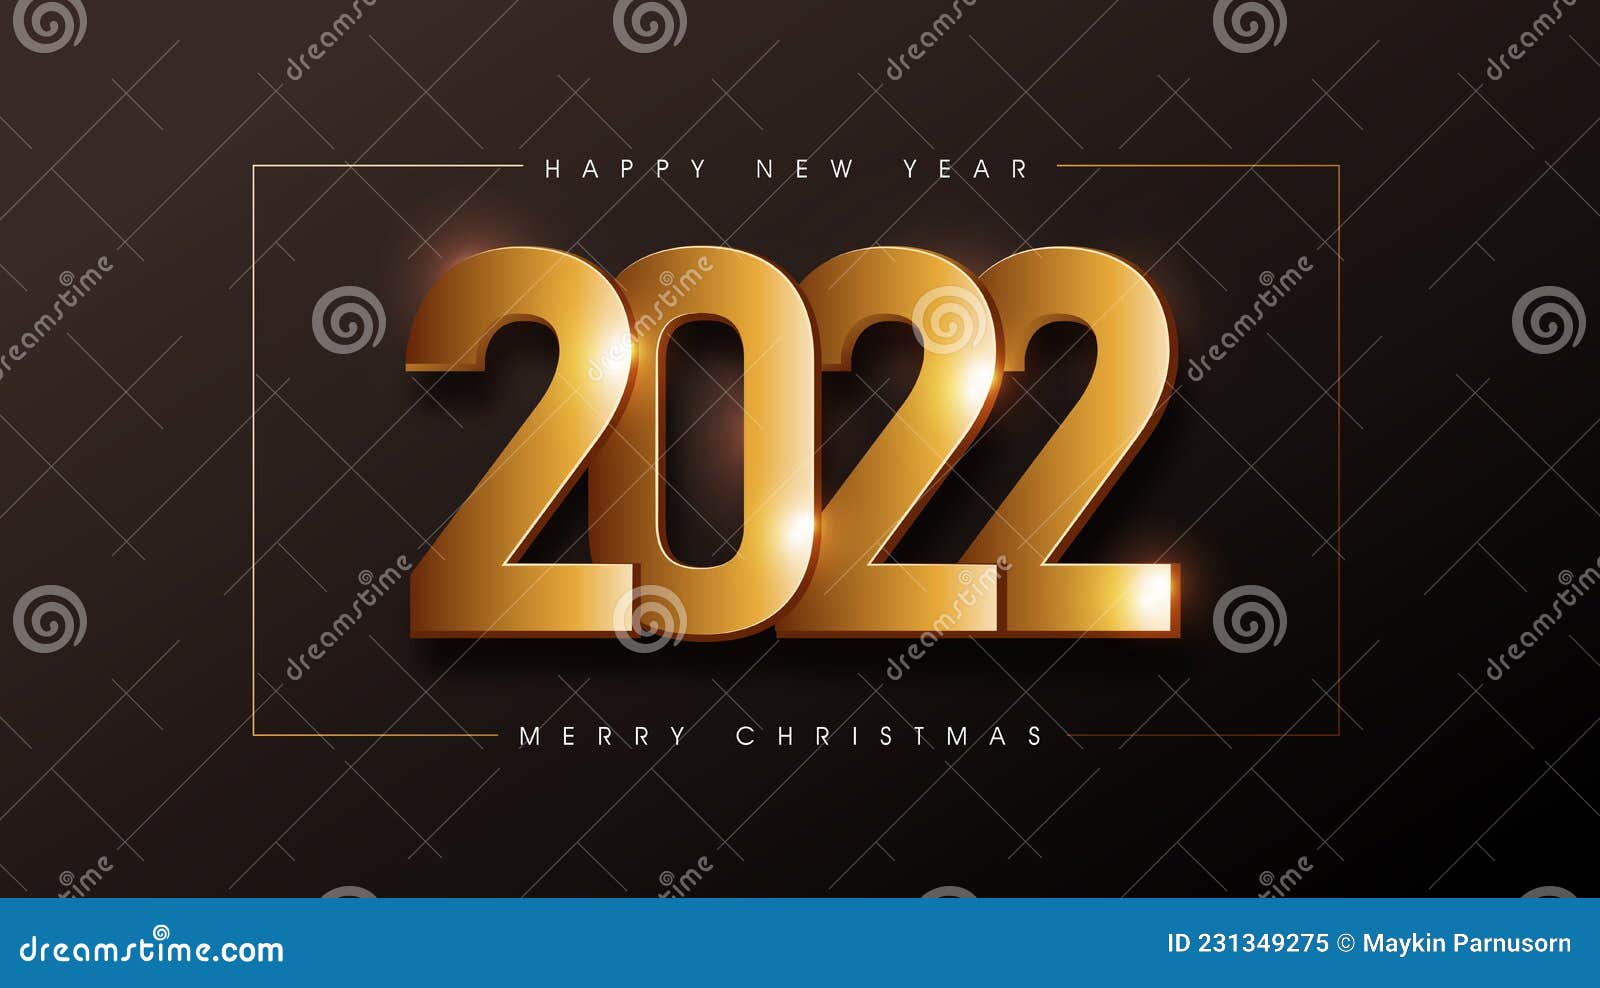 Merry Christmas And Happy New Year 2022 Lettering Design